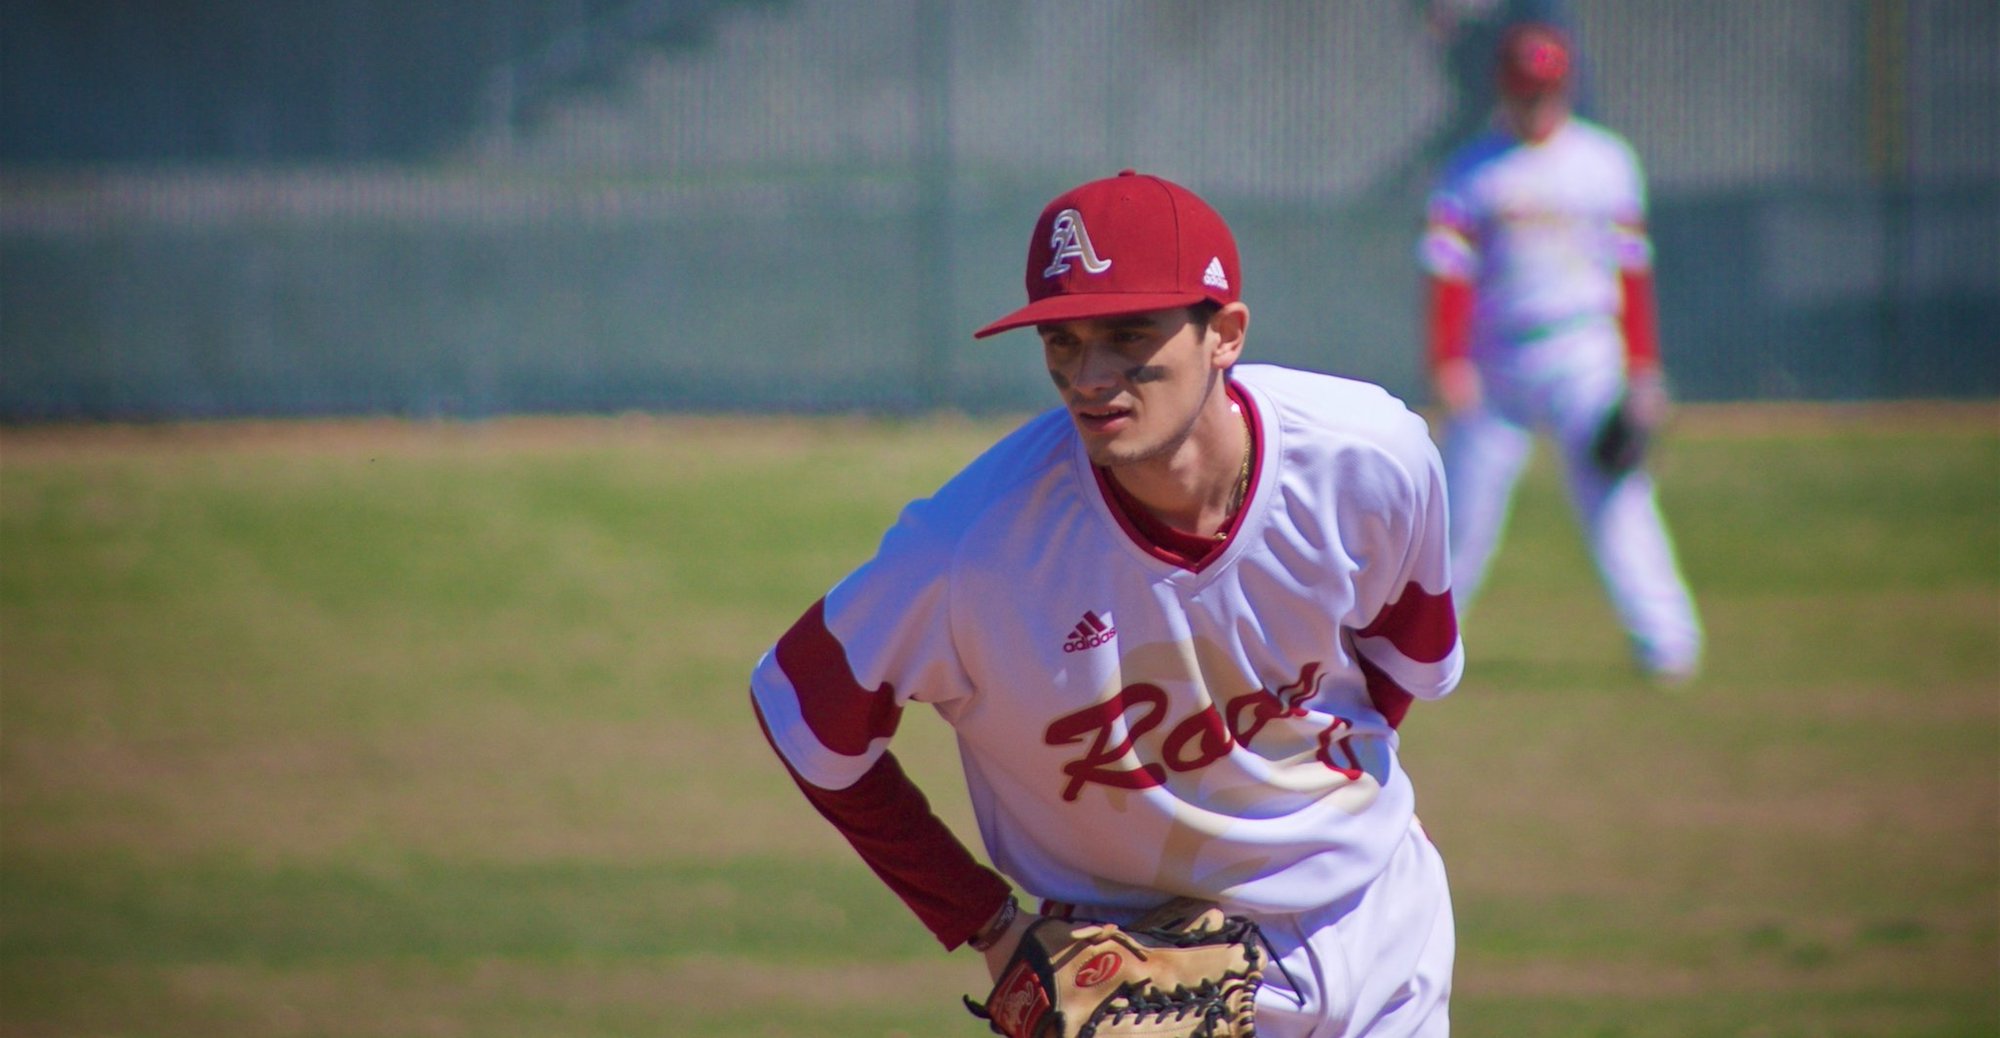 'Roos Drop Two to Louisiana College